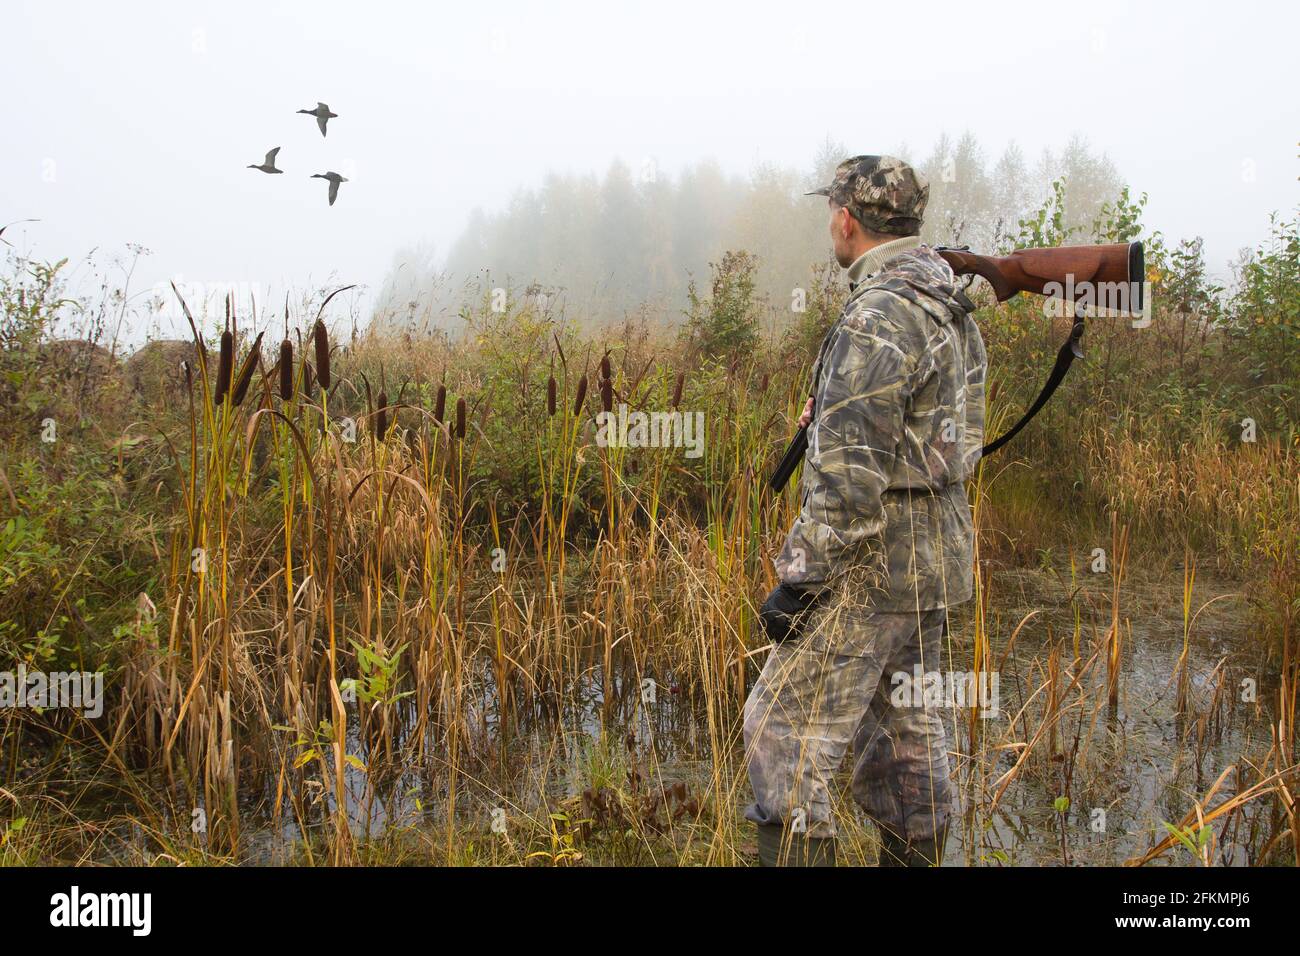 a hunter with a shotgun on his shoulder watches the ducks fly away on a foggy morning Stock Photo